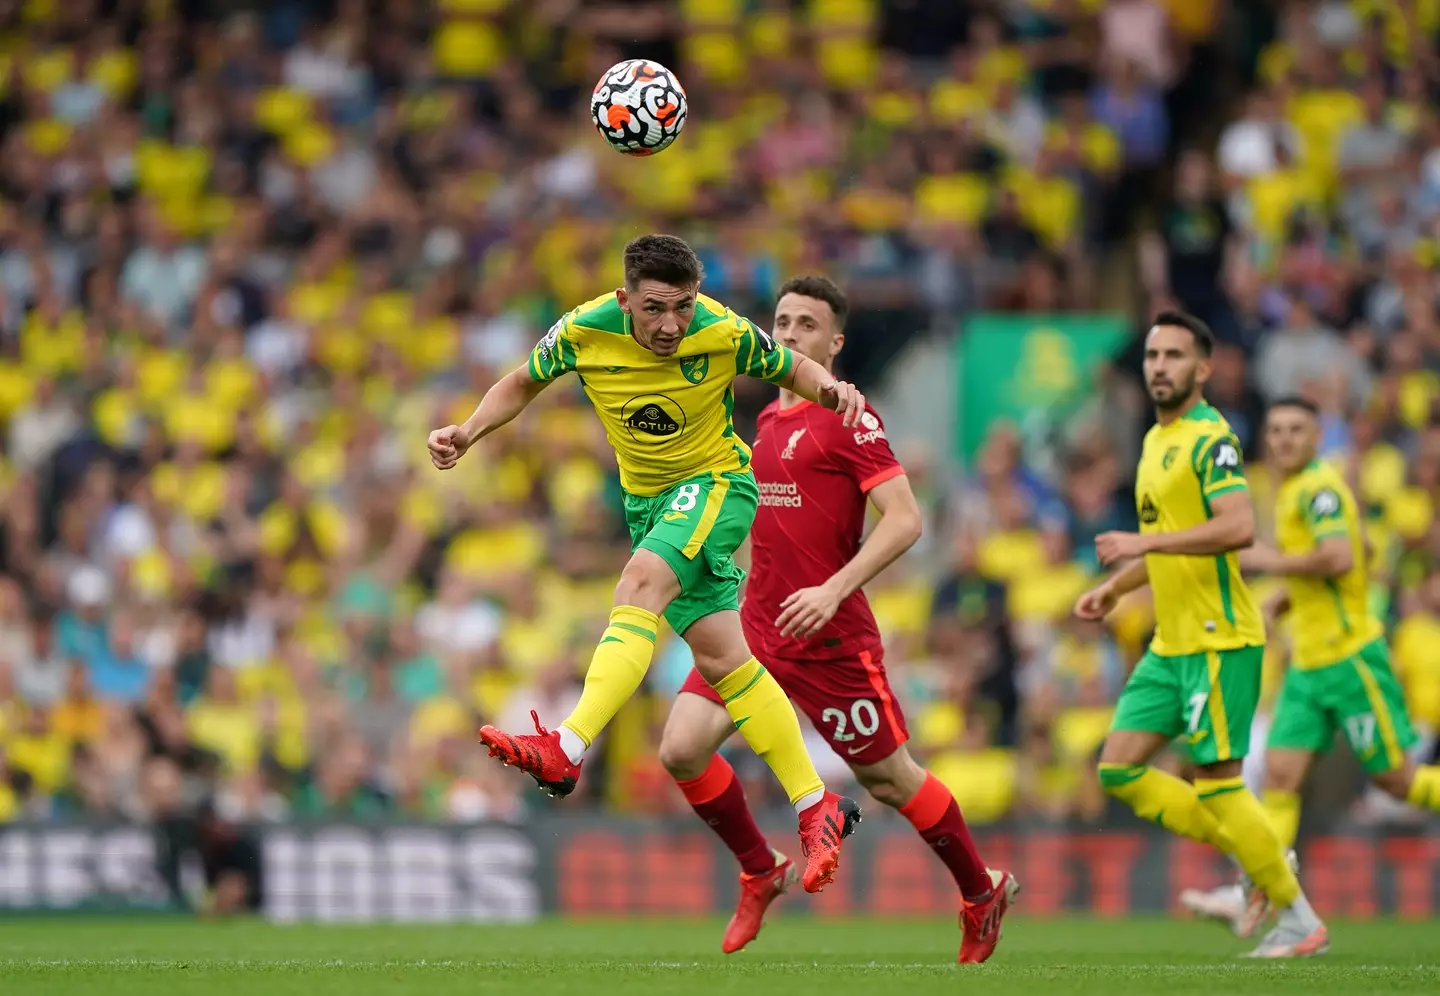 Gilmour made his first appearance for Norwich on the opening weekend of the season. Image: PA Images